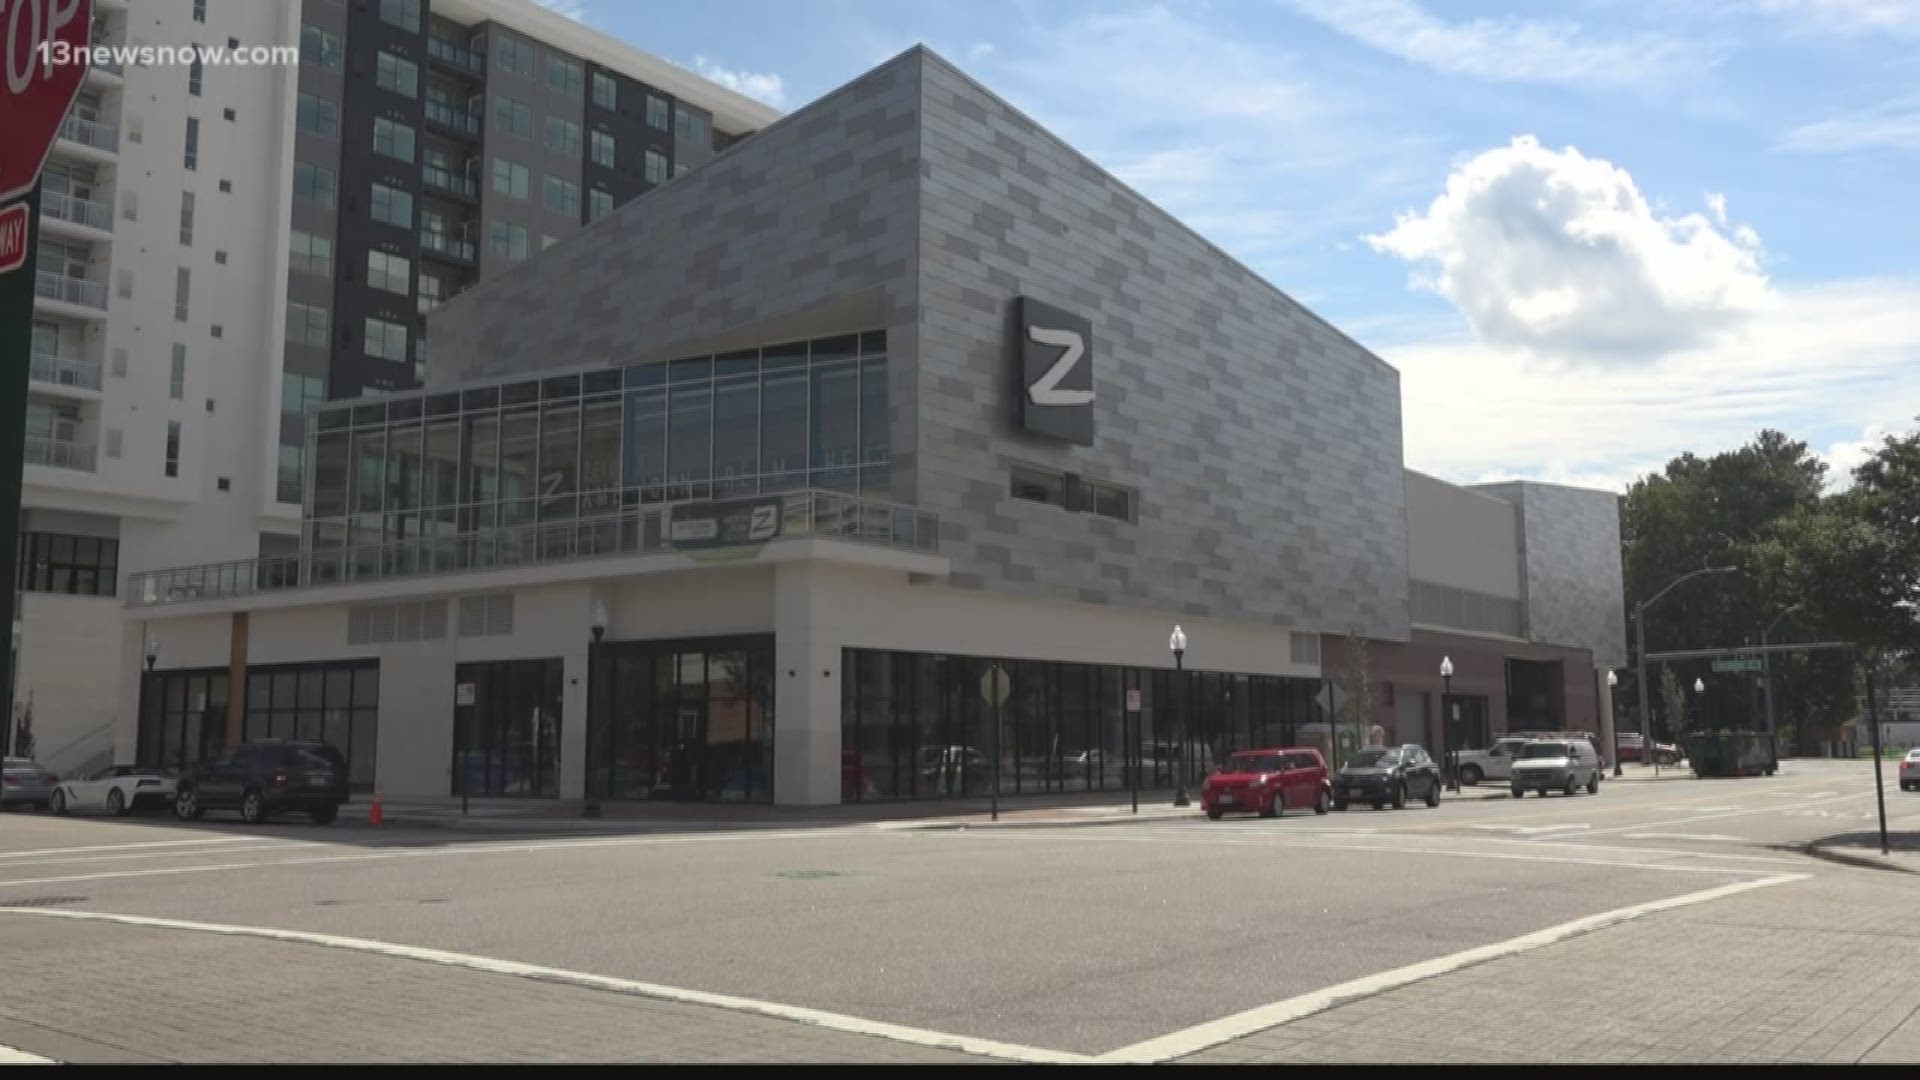 A bigger and better theater will open at Virginia Beach's Town Center!